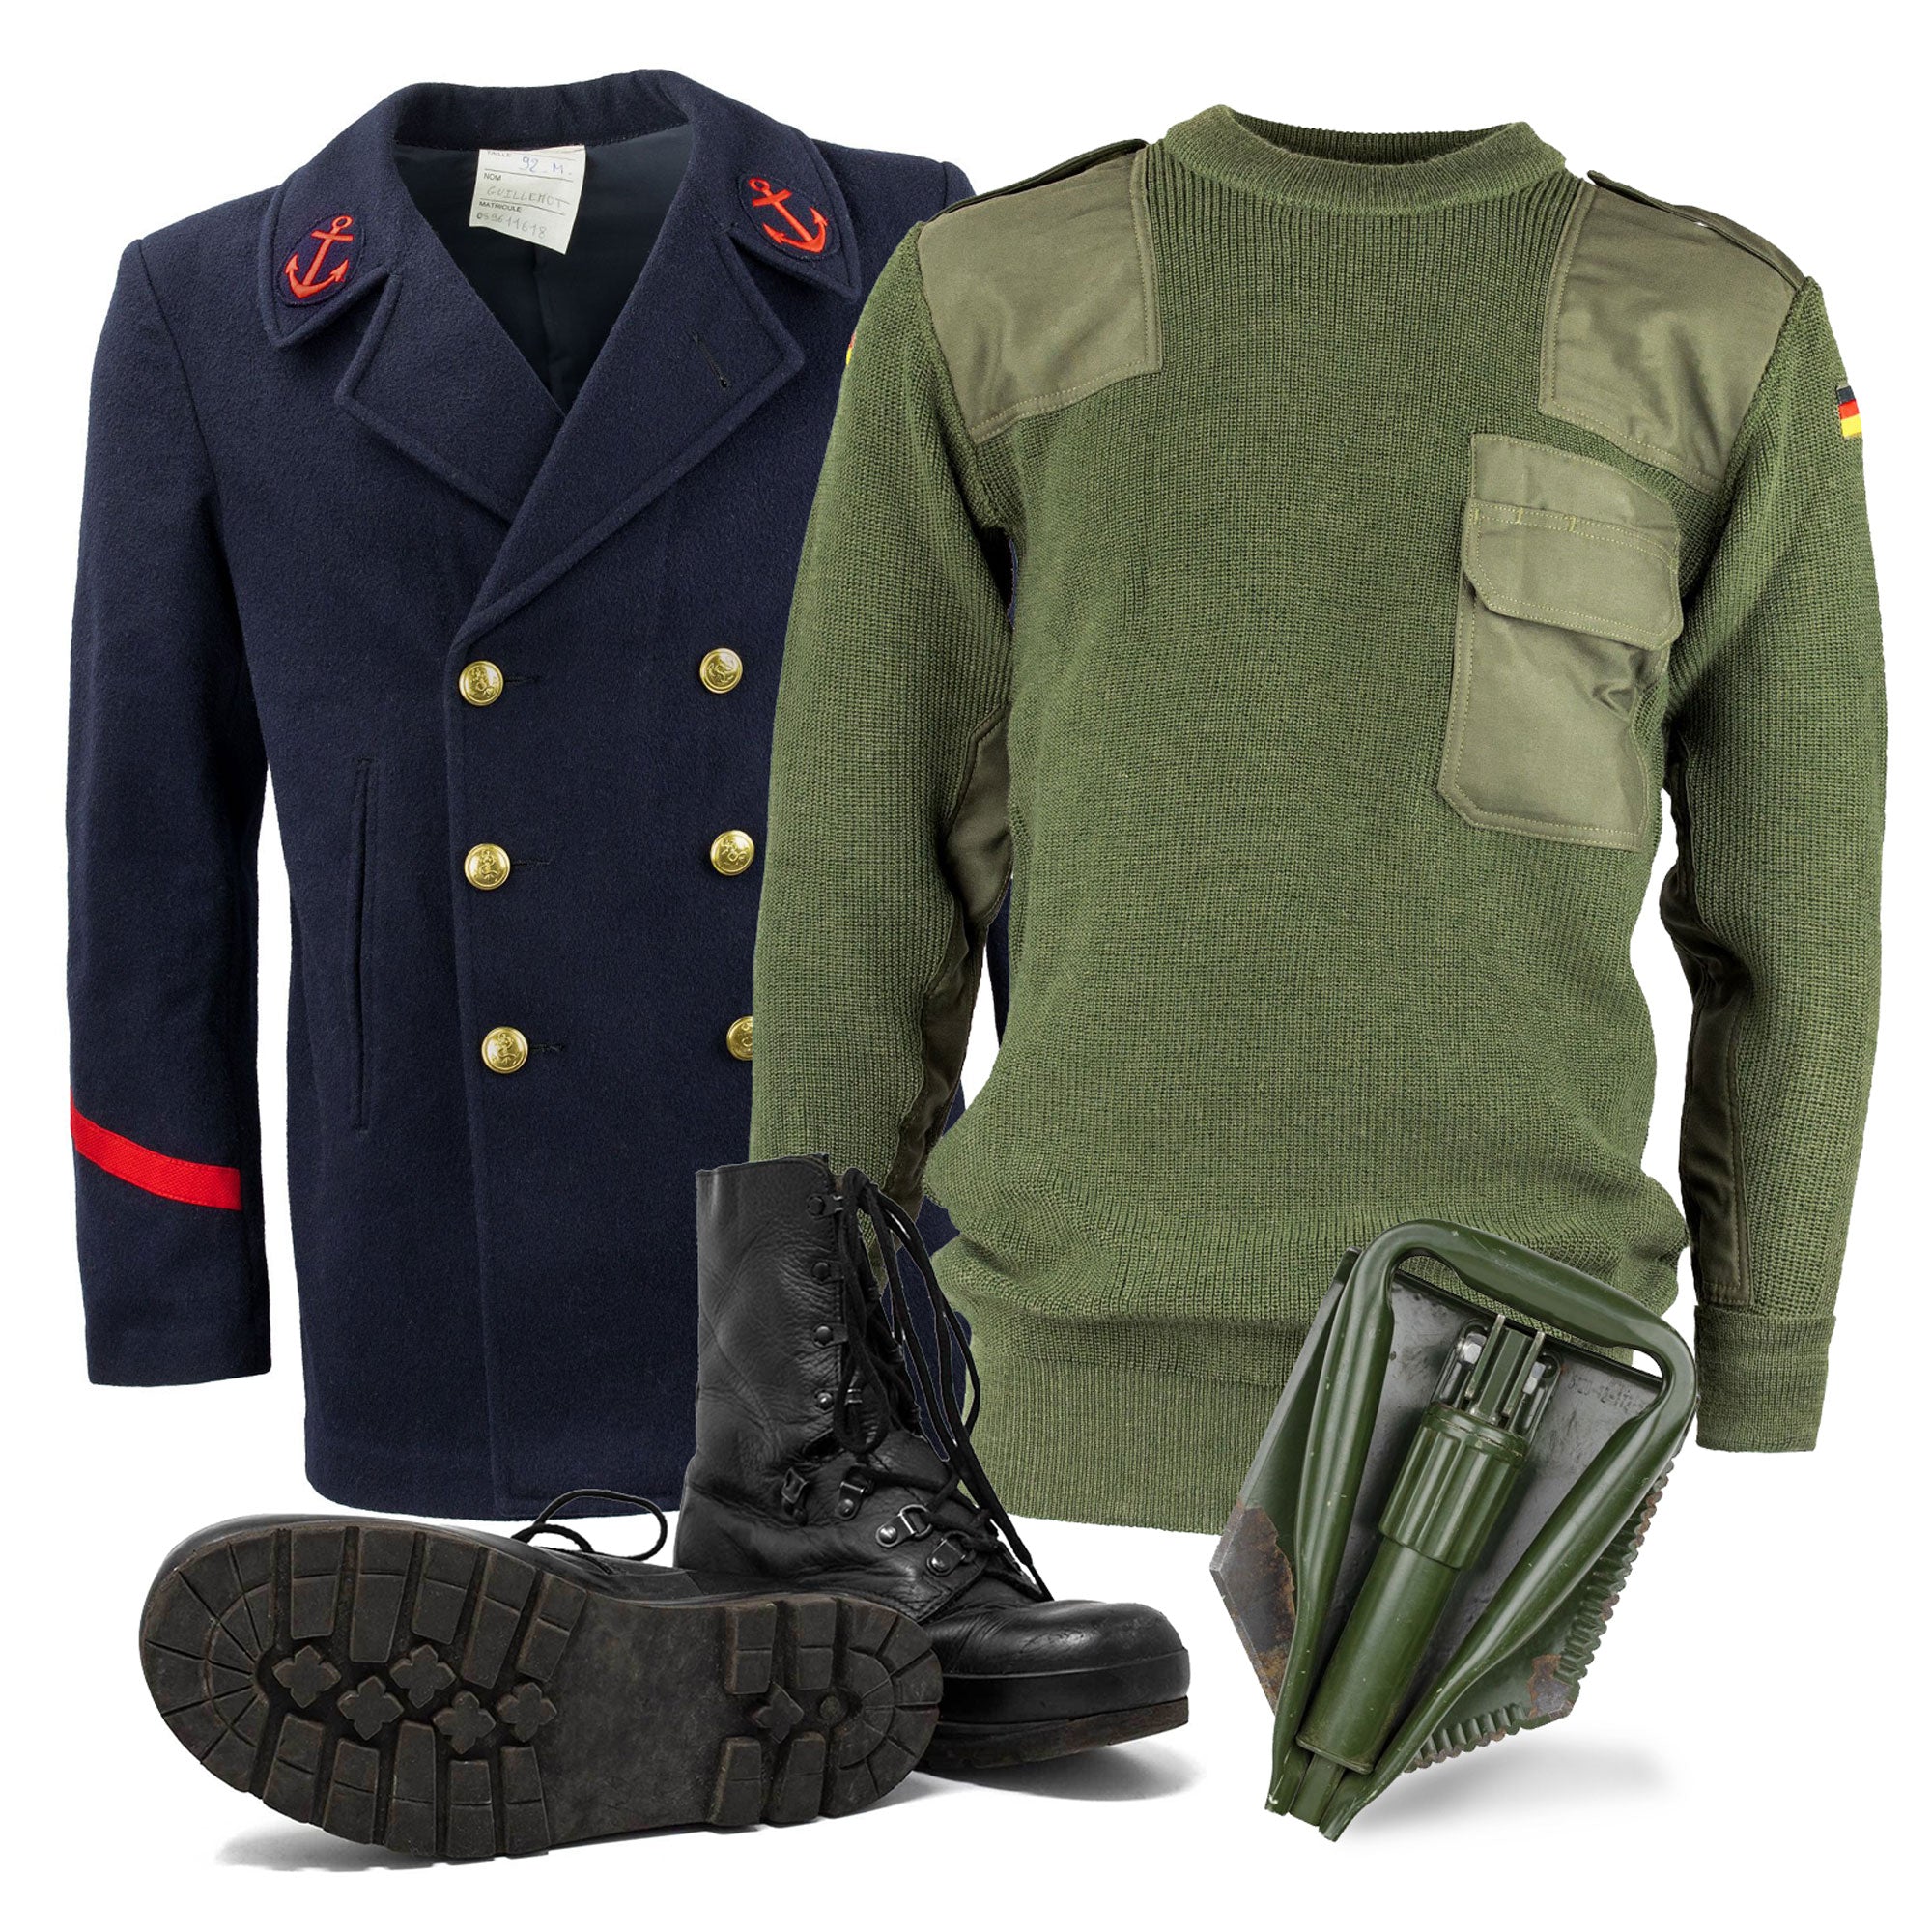 Five Reasons To Purchase Military Surplus